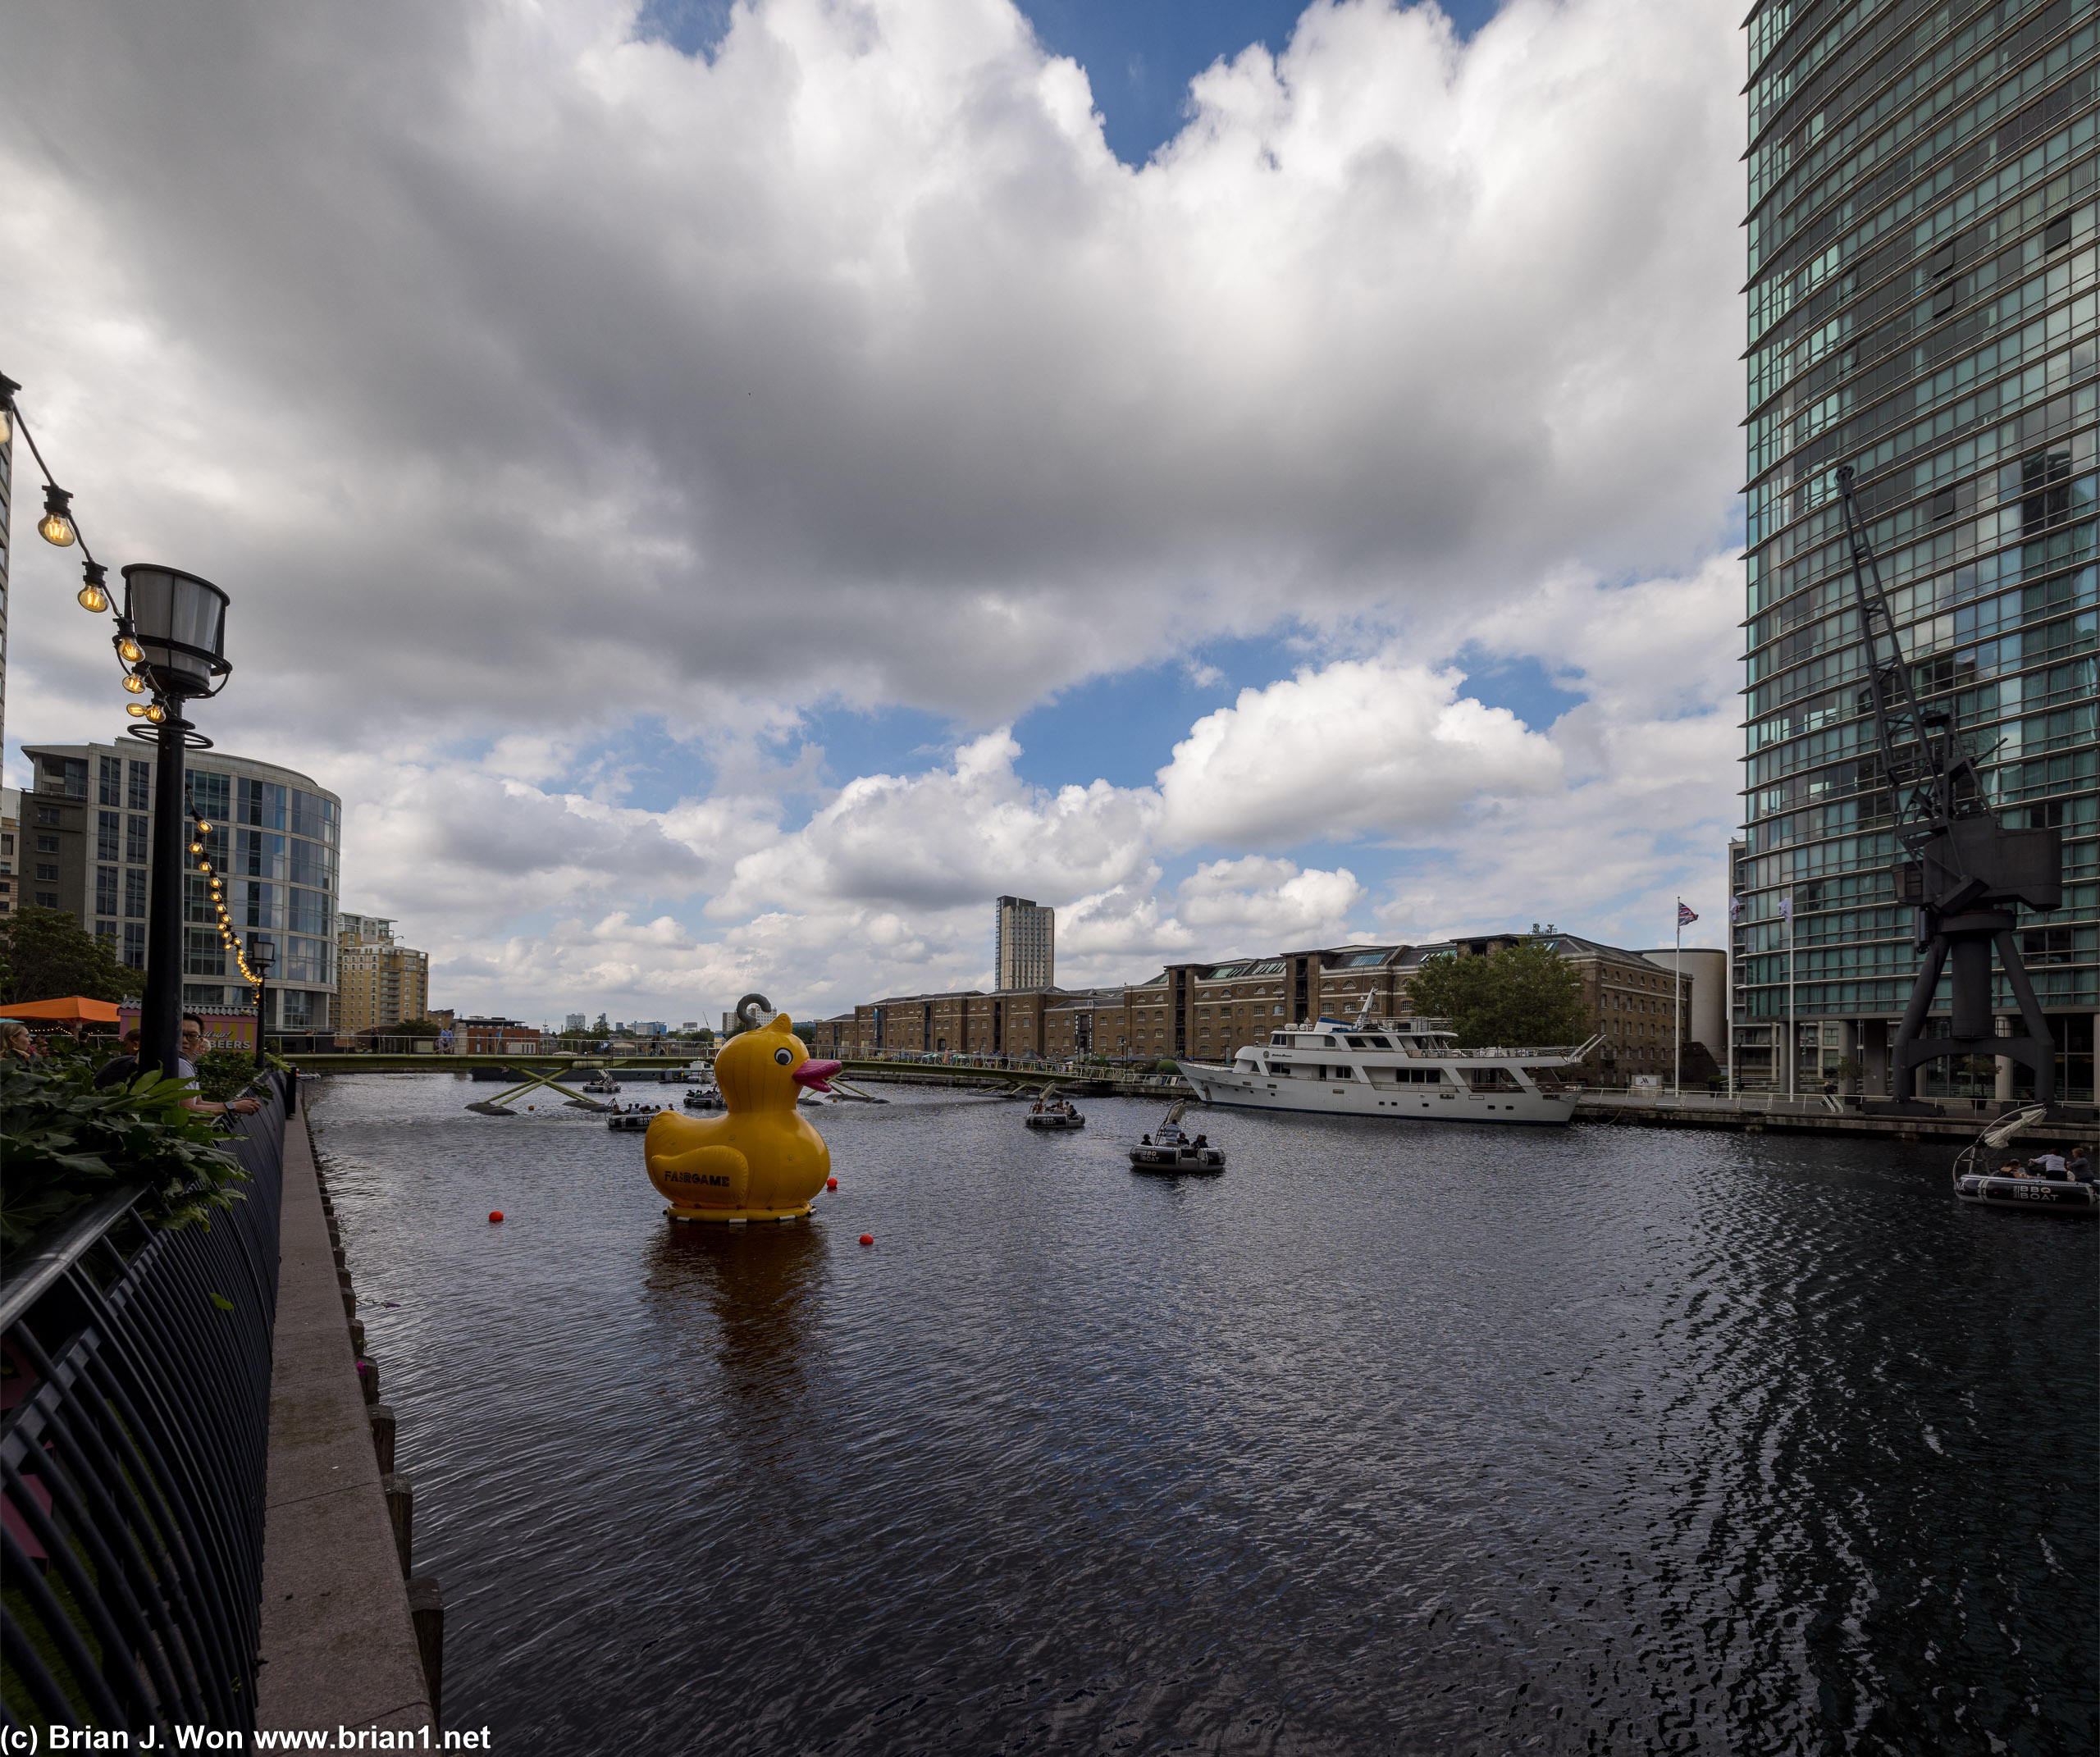 There is a giant rubber duck in the Thames.